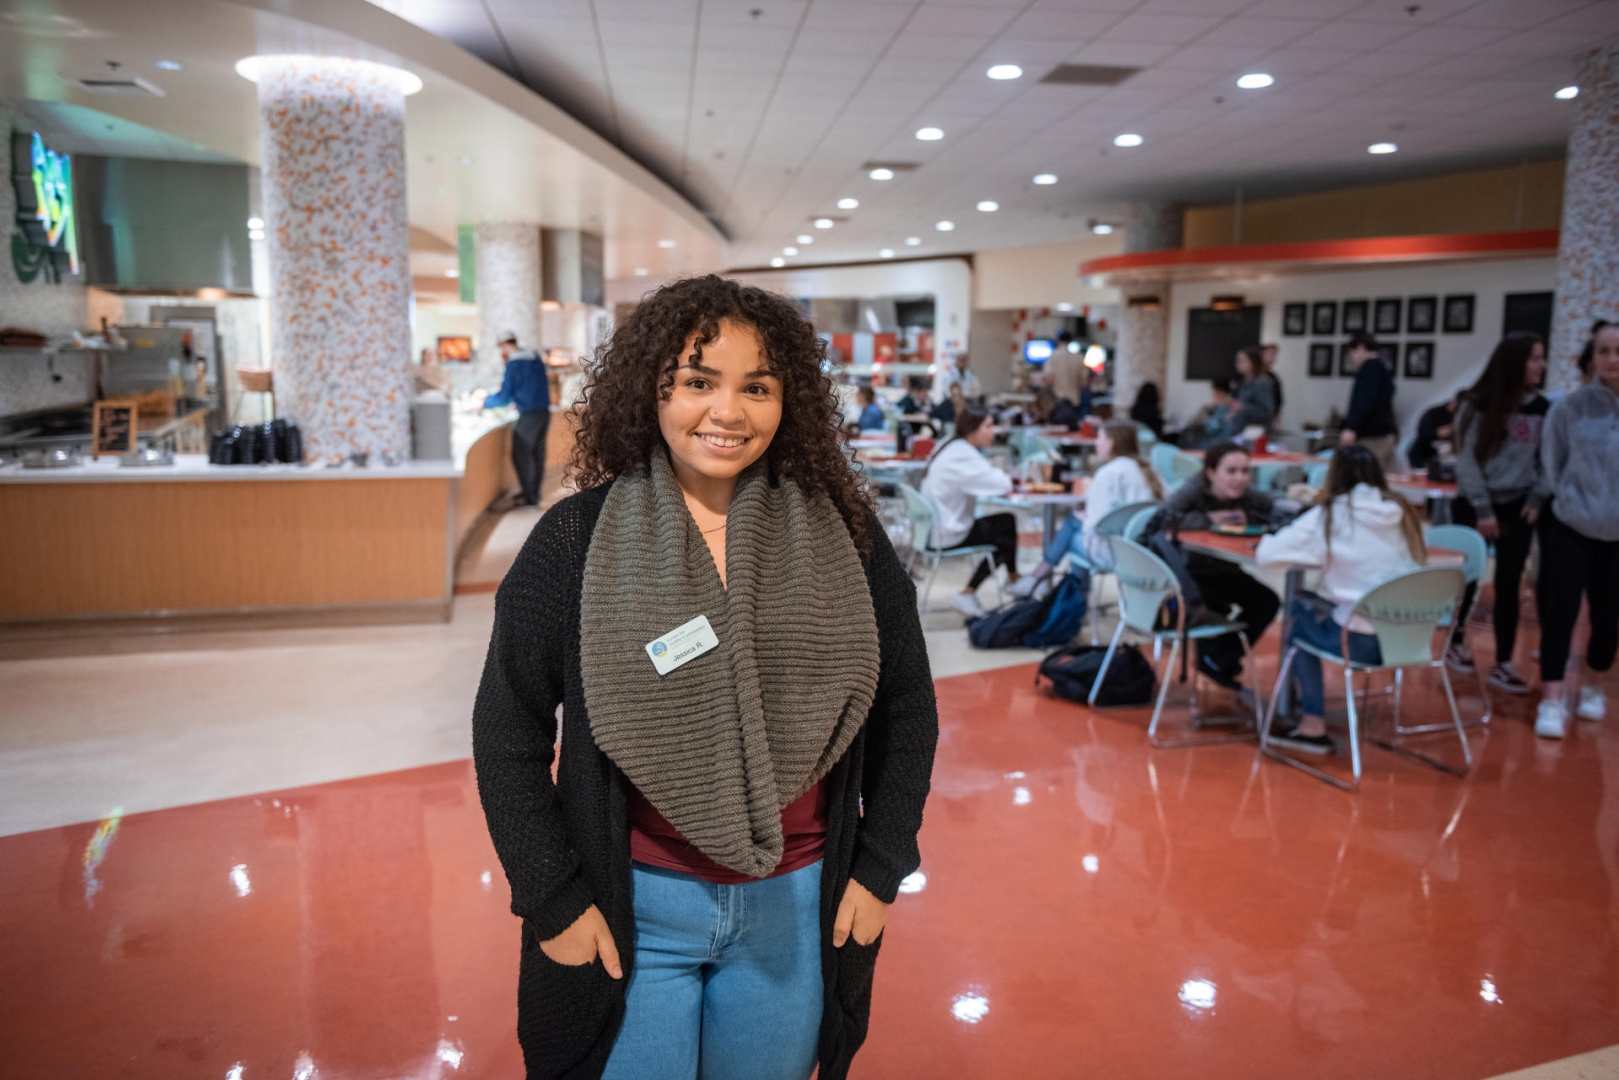 Jessica is wearing a scarf and is smiling and standing inside a dining hall with other students sitting and eating around her.